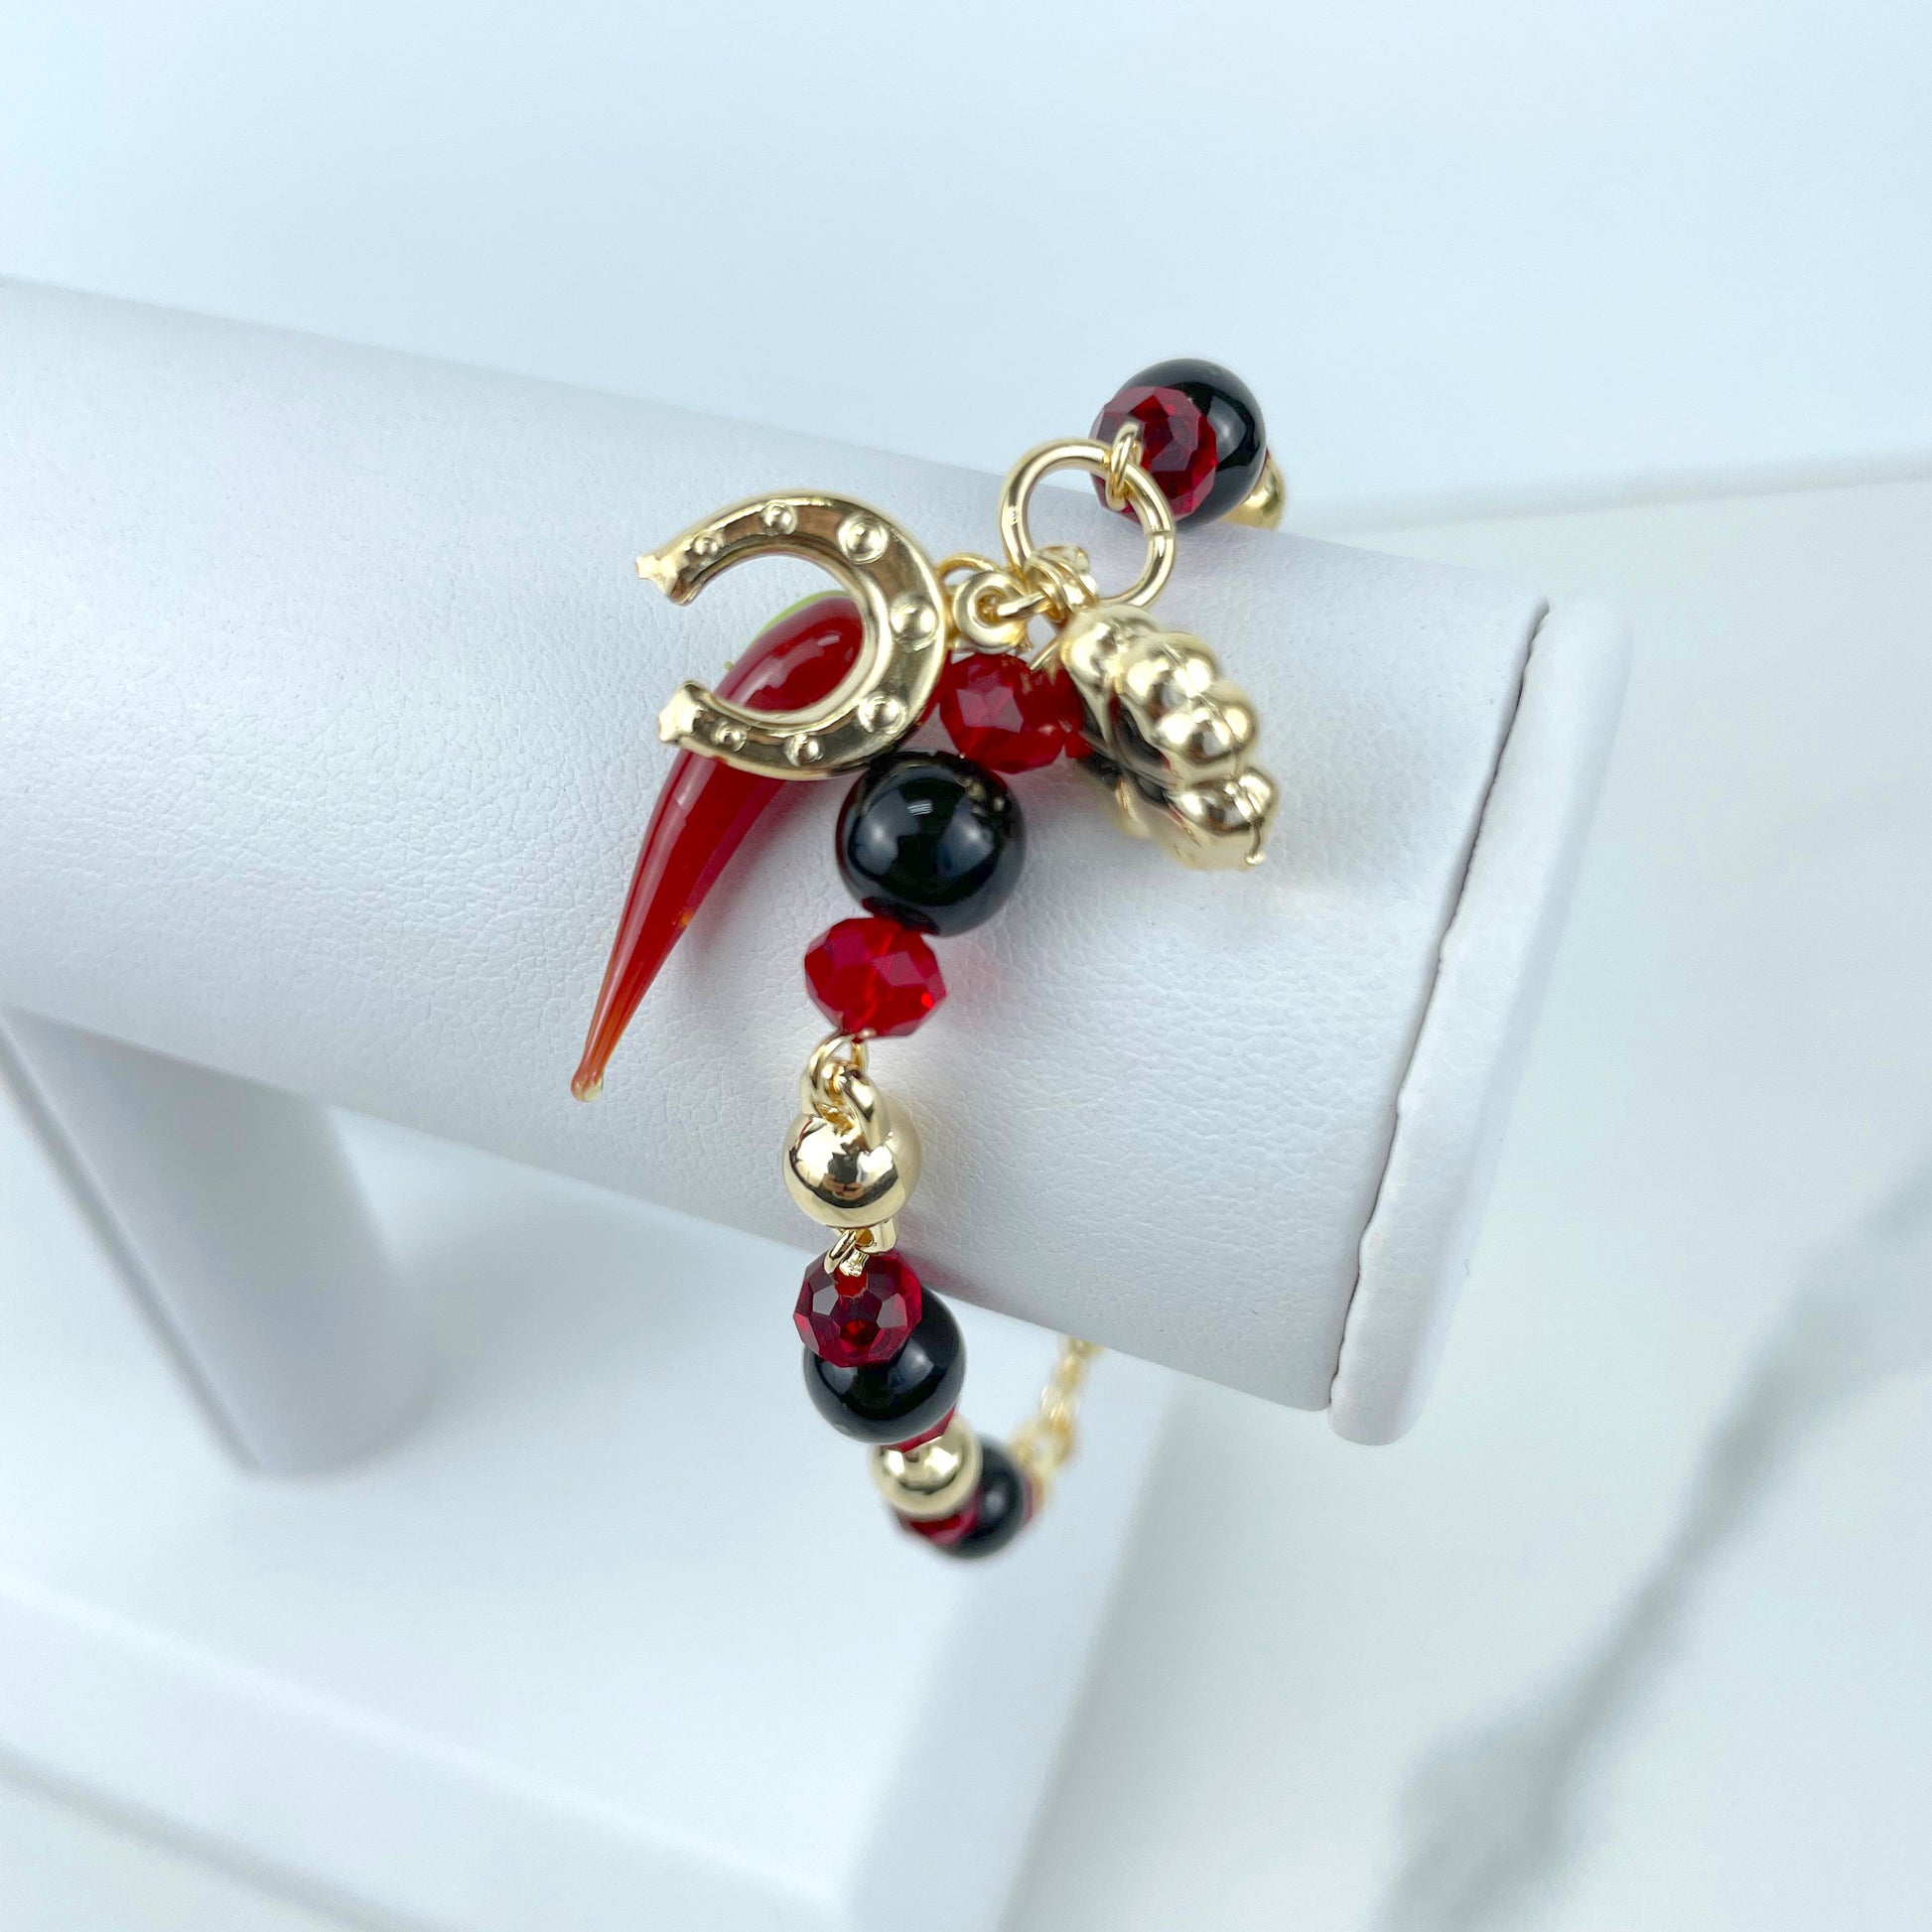 18k Gold Filled Black, Red & Gold  Beads, Chili, Clover, Horseshoe Charms Bracelet, Lucy Protection, Wholesale Jewelry Making Supplies